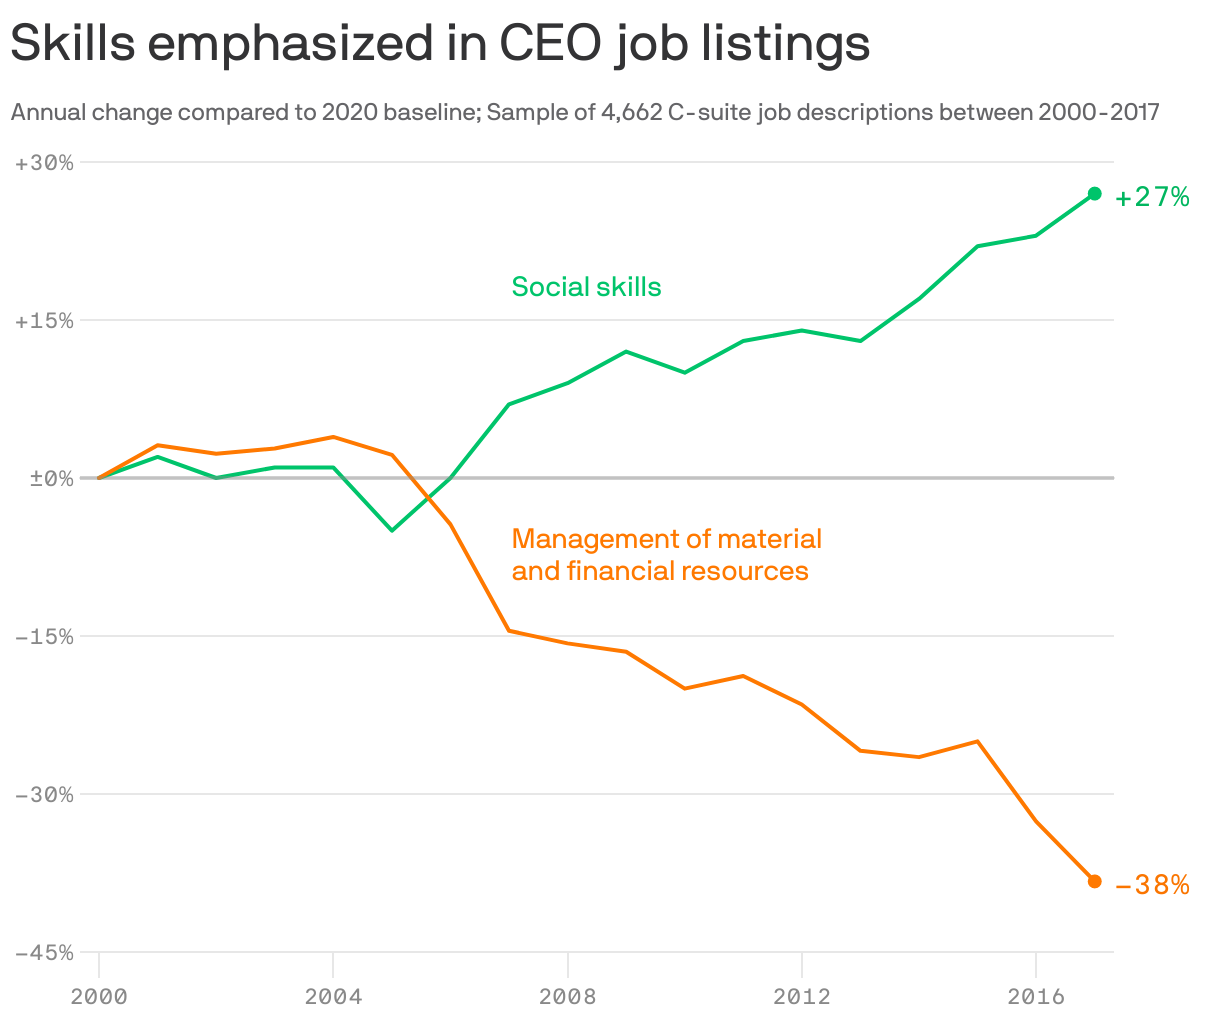 Skills emphasized in CEO job listings